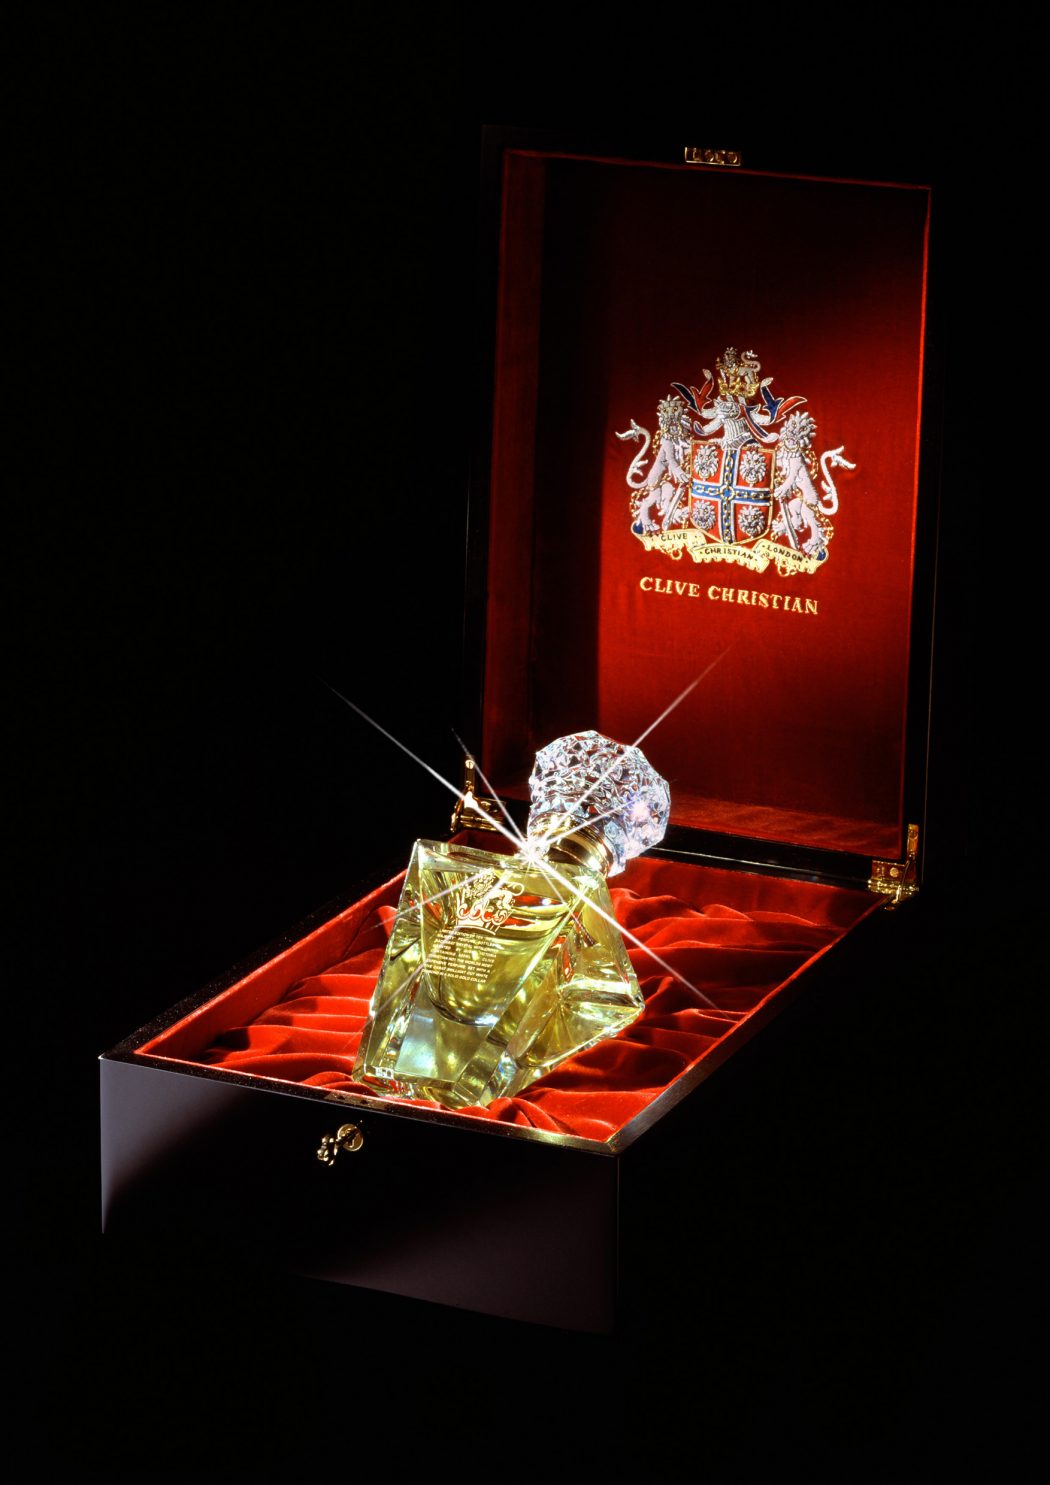 clive-christian-no-1-perfume-imperial-majesty-edition-photo-1 10 Most Expensive Perfumes for Women in The World